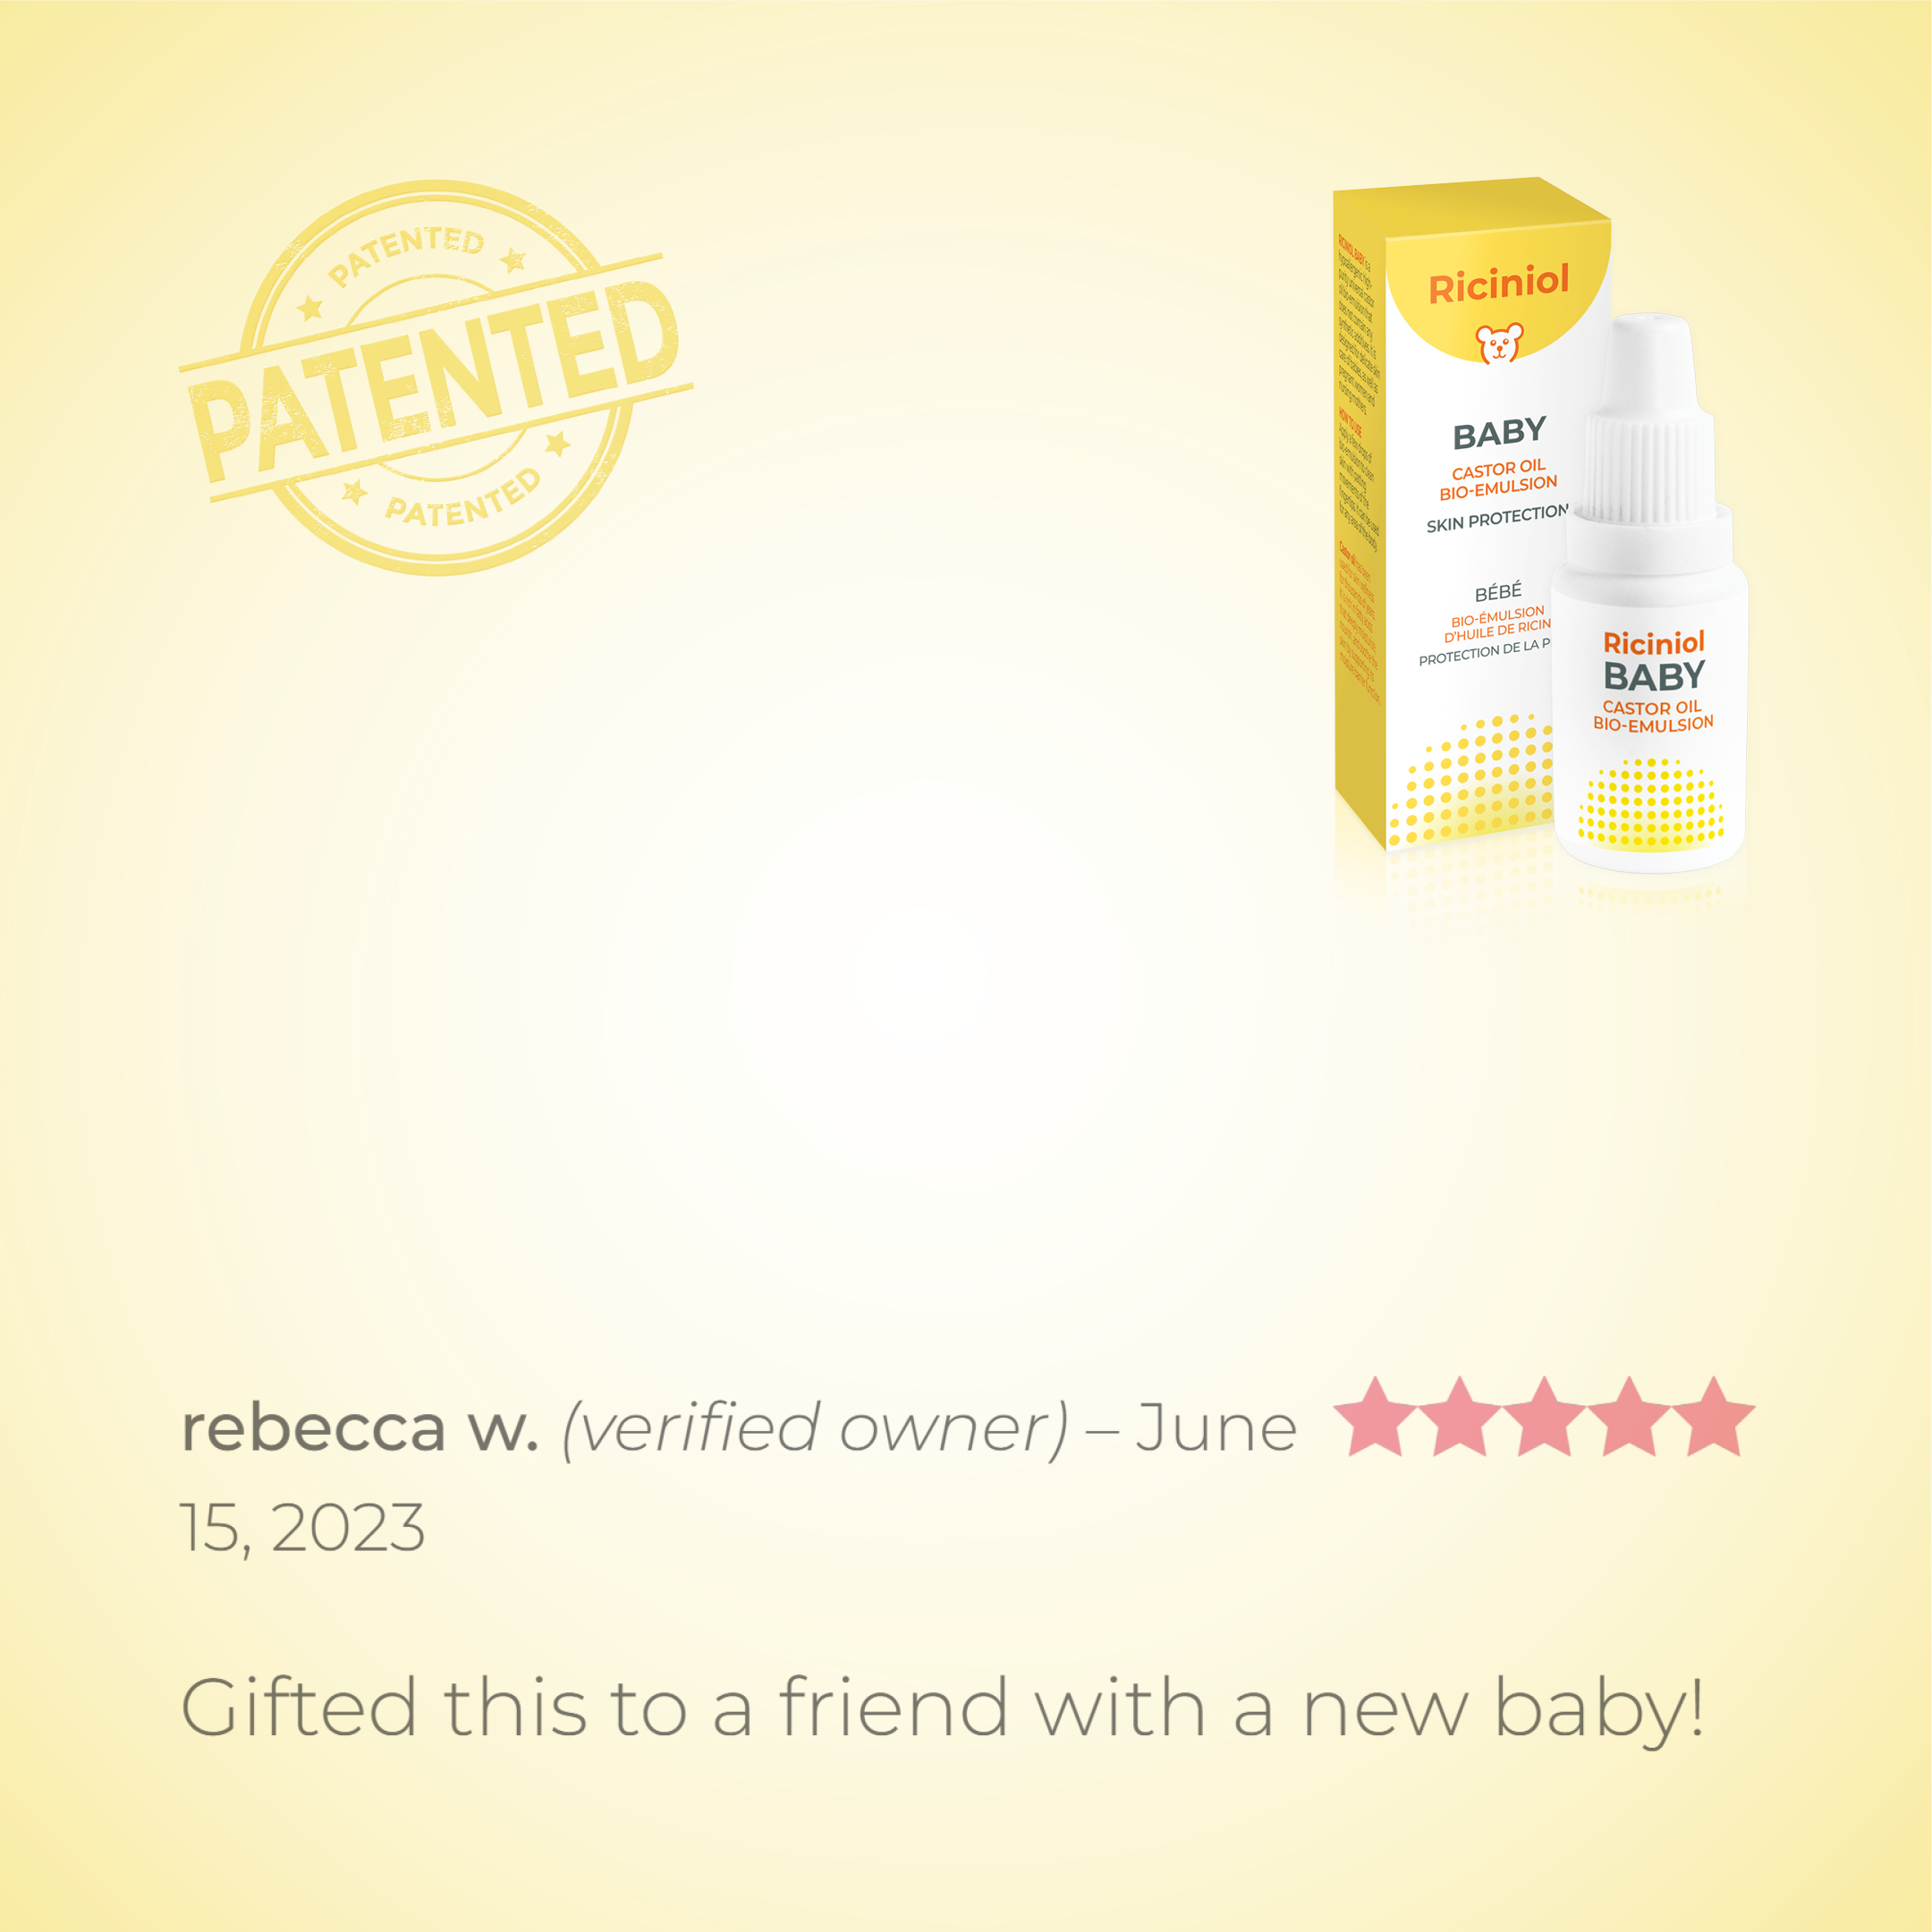 Riciniol Baby by Rebecca Gifted this to a friend with a new baby!